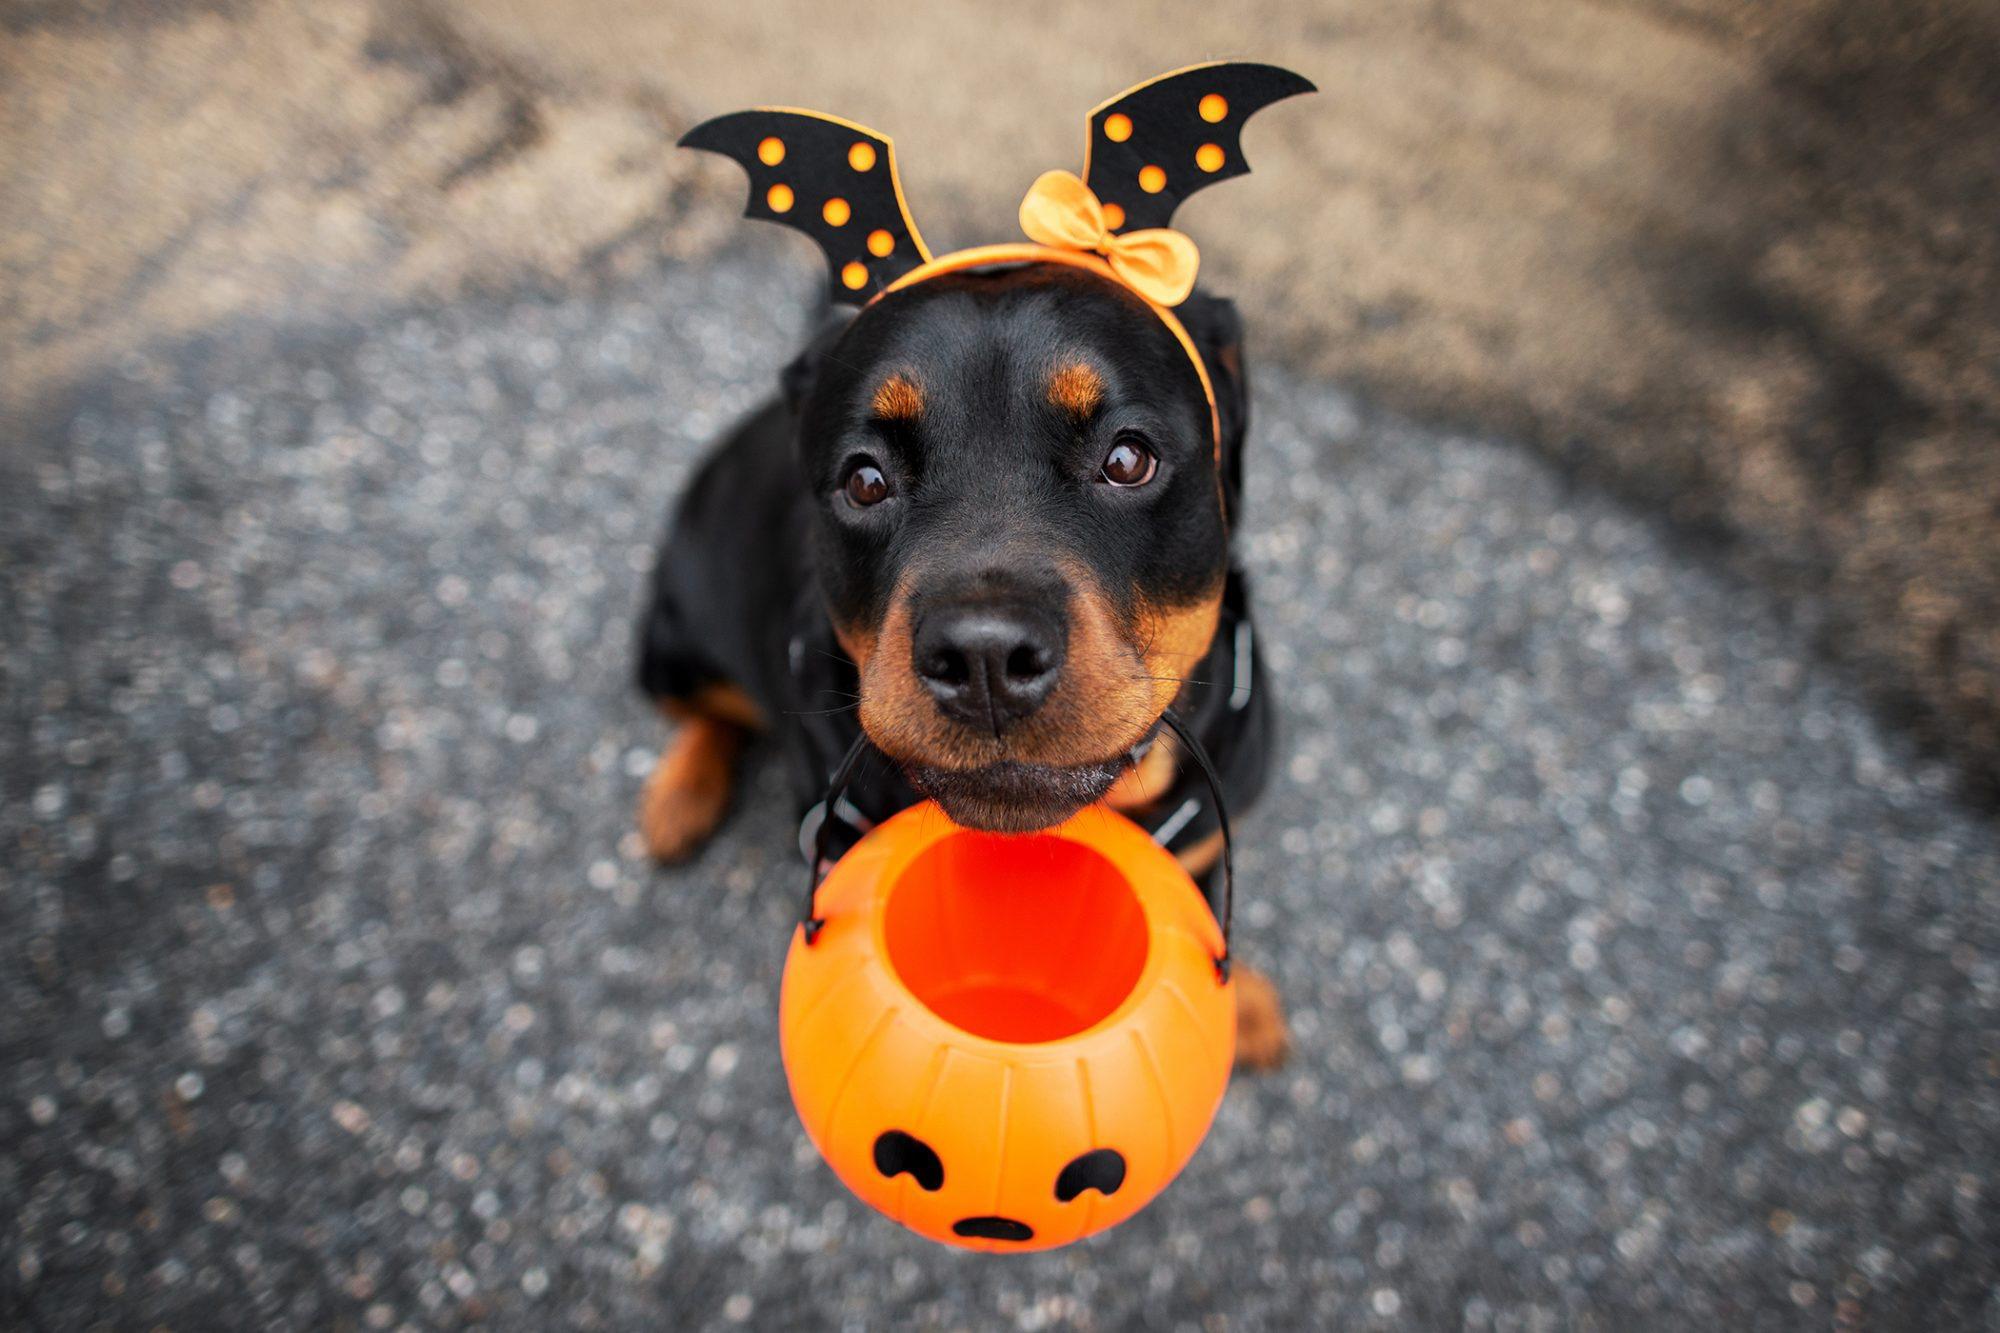 daily dose of pics and memes - halloween dog